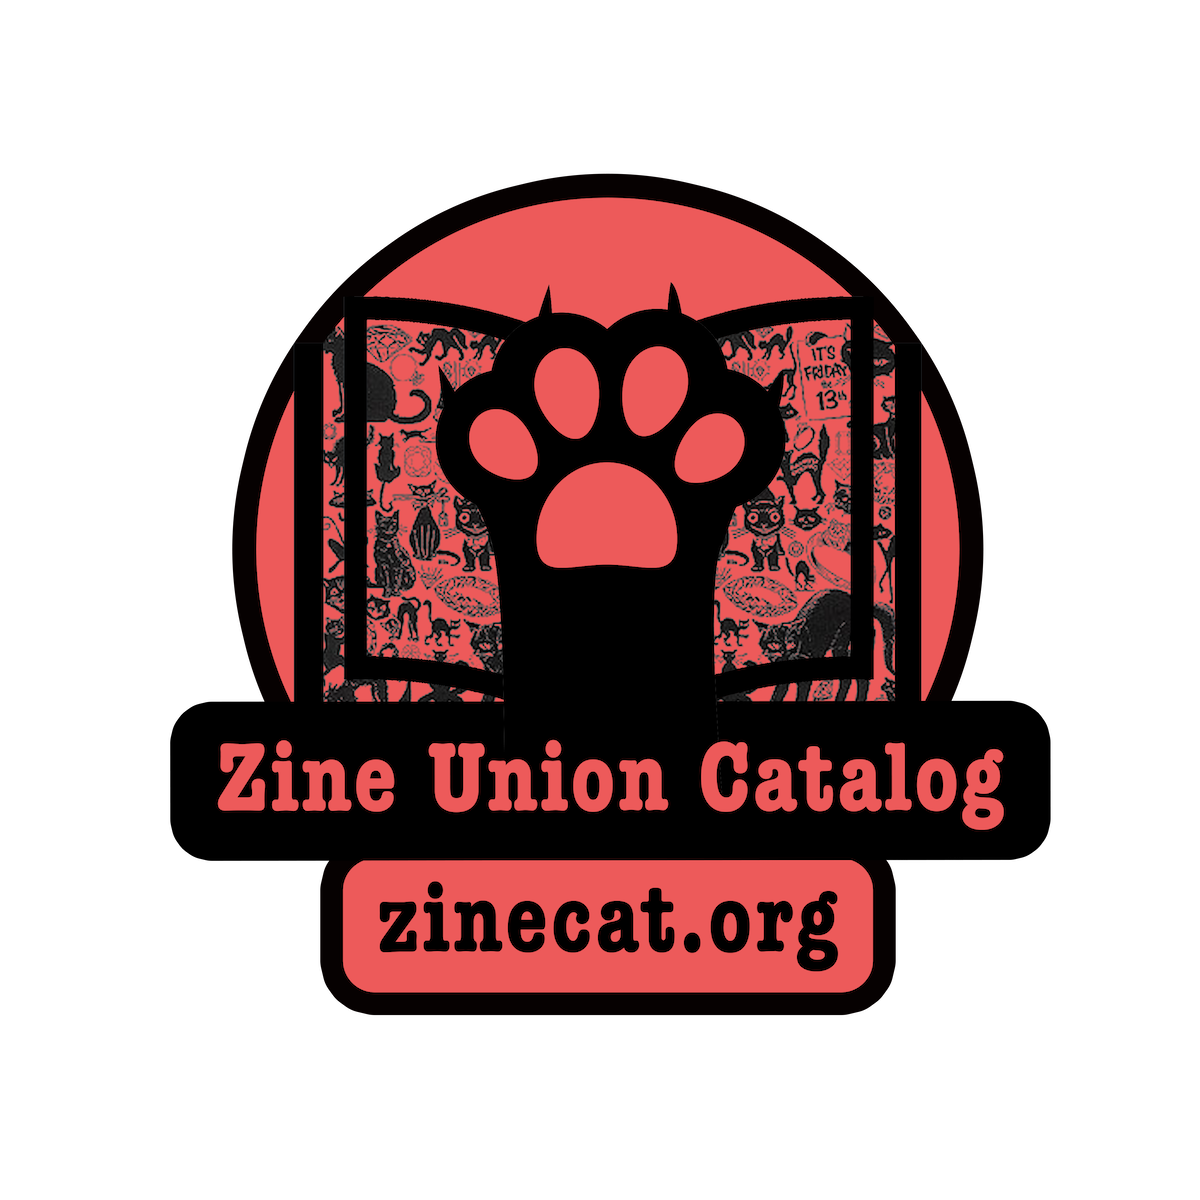 graphic of cat paw/fist on open pages of a zine. "Zine Union Catalog" and "zinecat.org" text. Colors are red and black. 